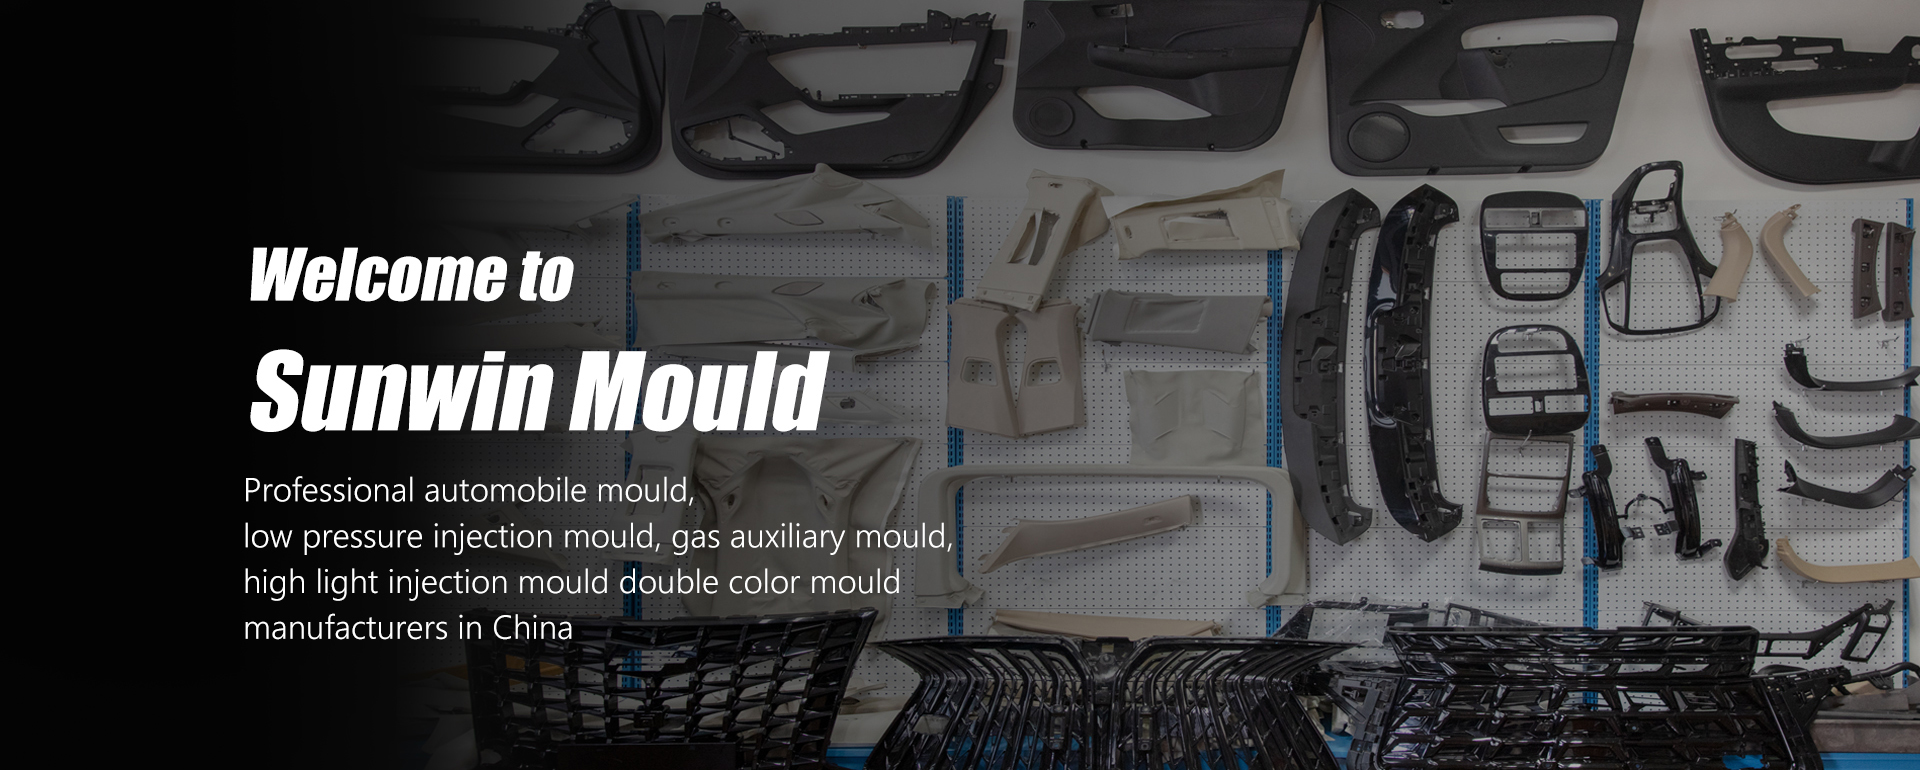 Chair Mould, Die Casting Mould, Tray Molds - Sunwin